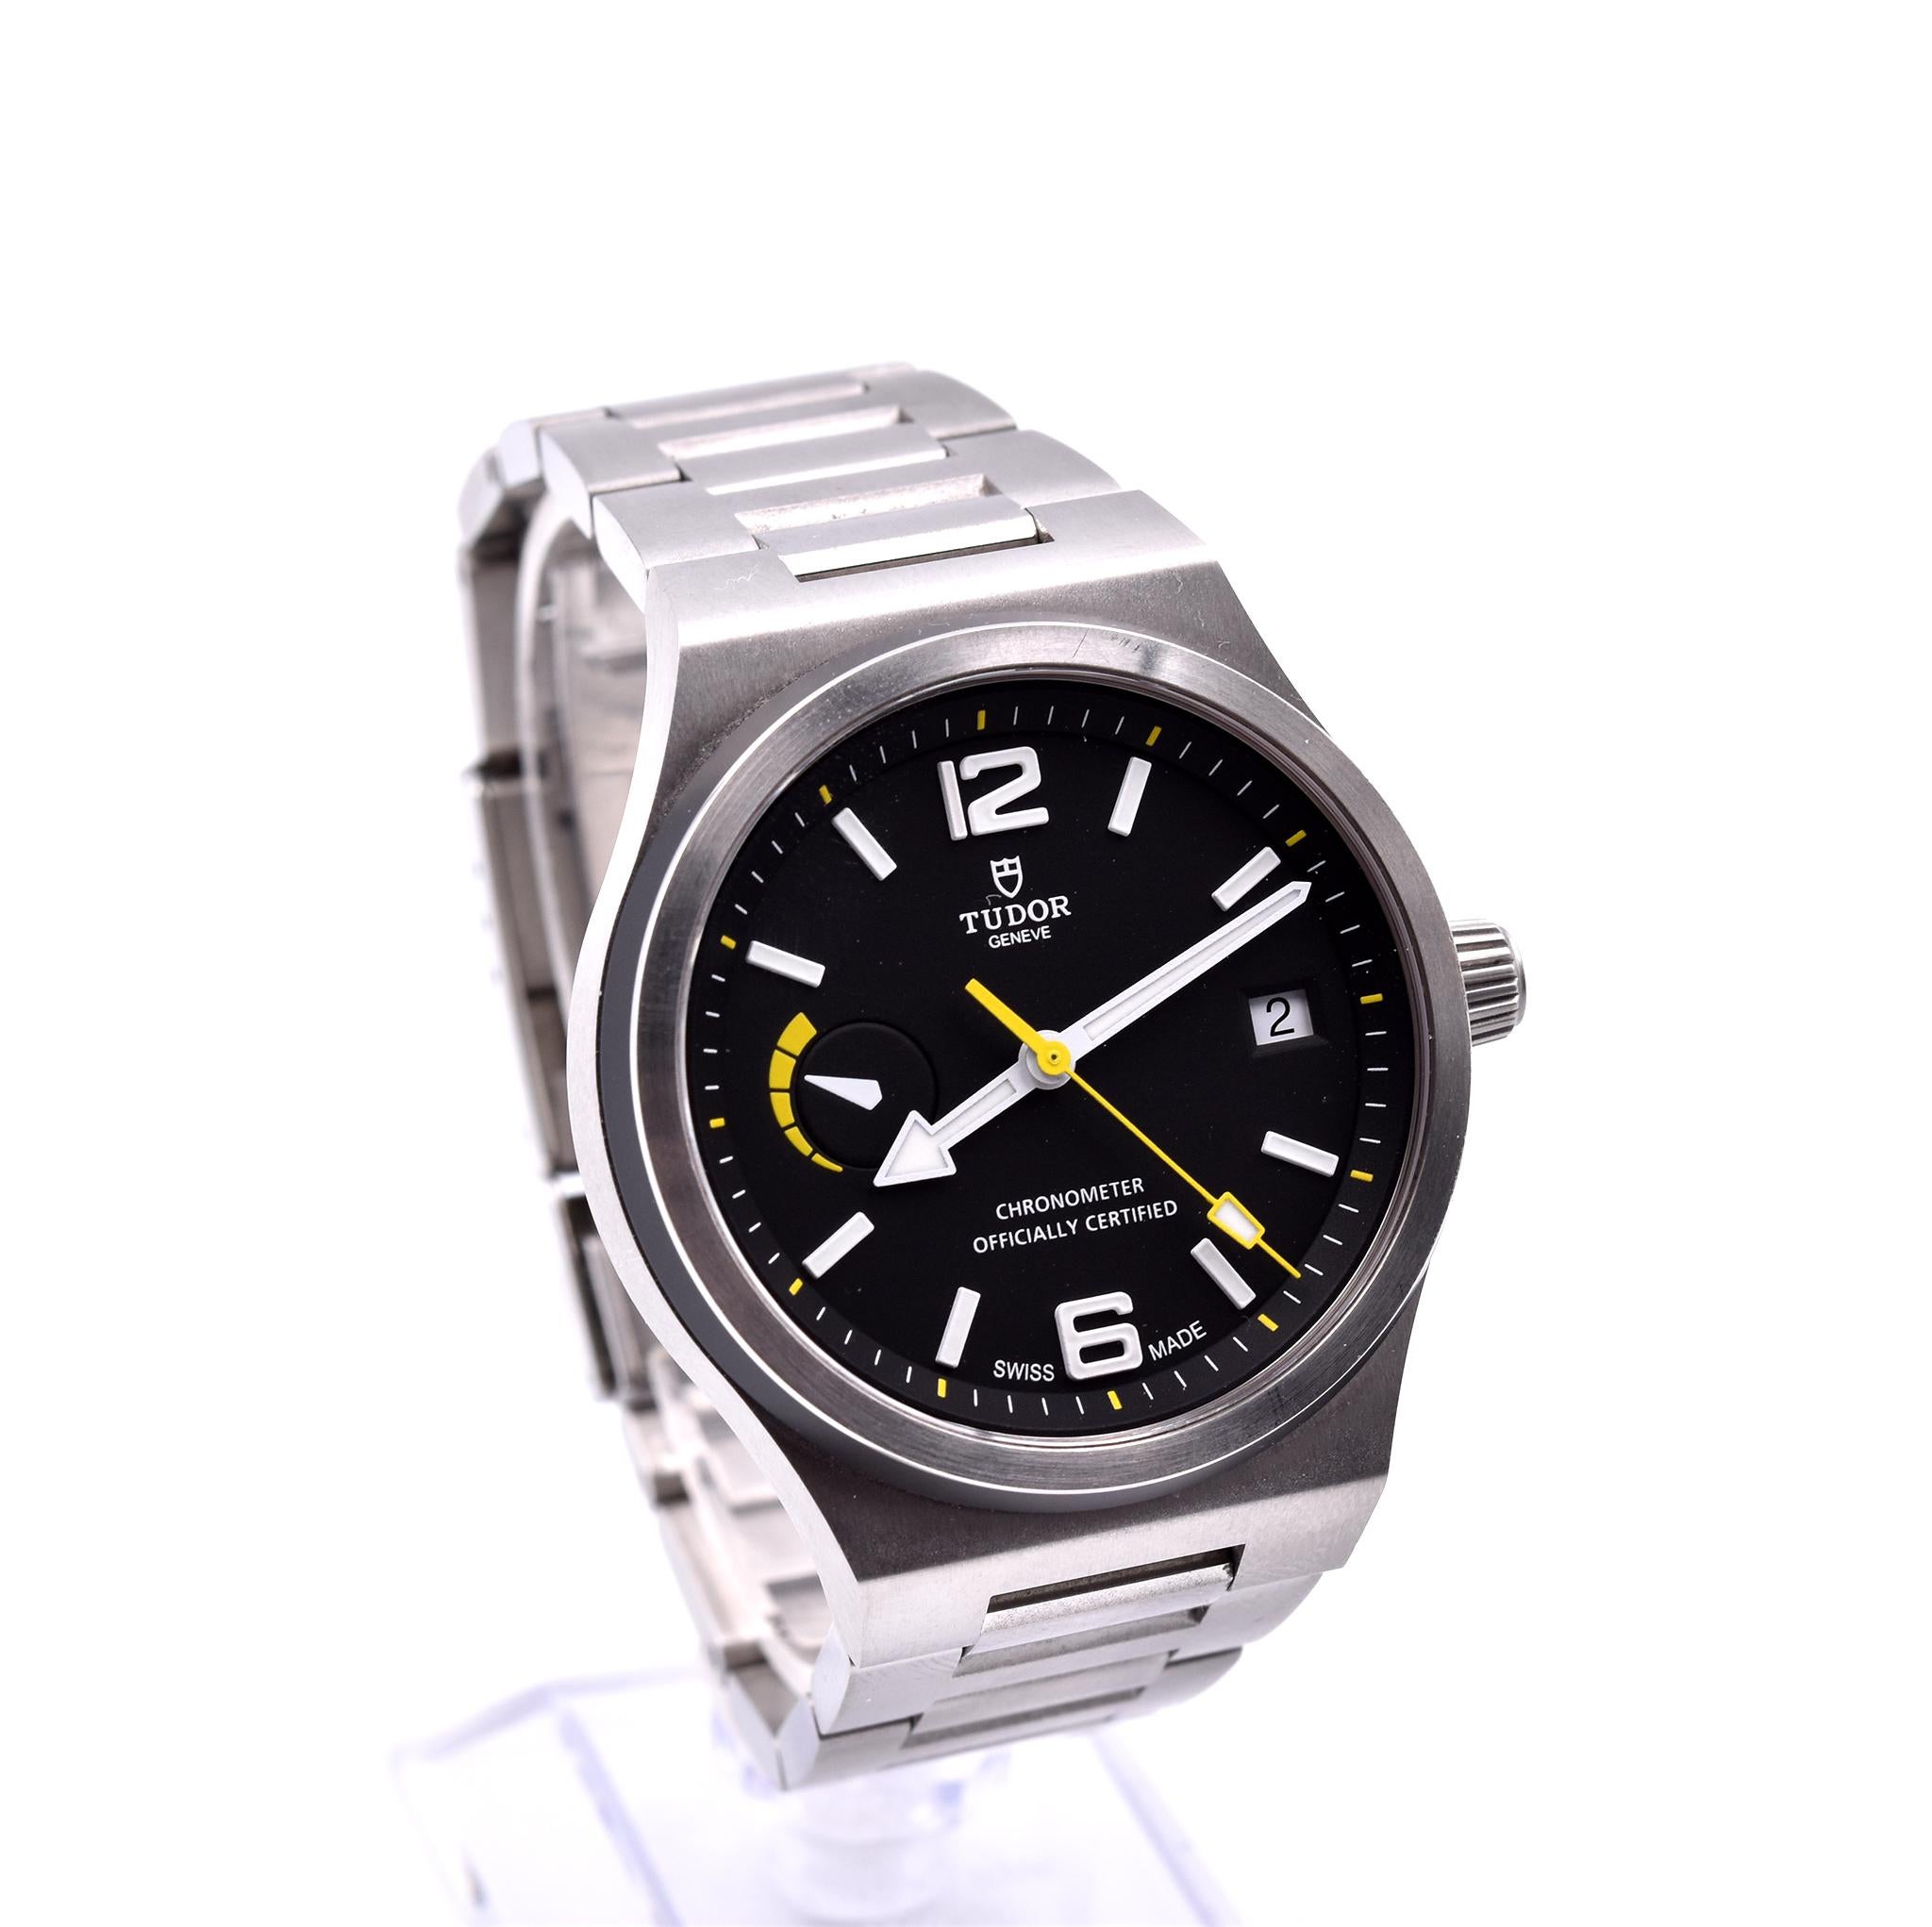 Movement: automatic Calibre MT5621
Function: hours, minutes, seconds, date, power indicator
Case: round 40mm stainless steel case, stainless steel smooth bezel, sapphire crystal, screw-down crown, waterproof to 100 meters 
Band: stainless steel with